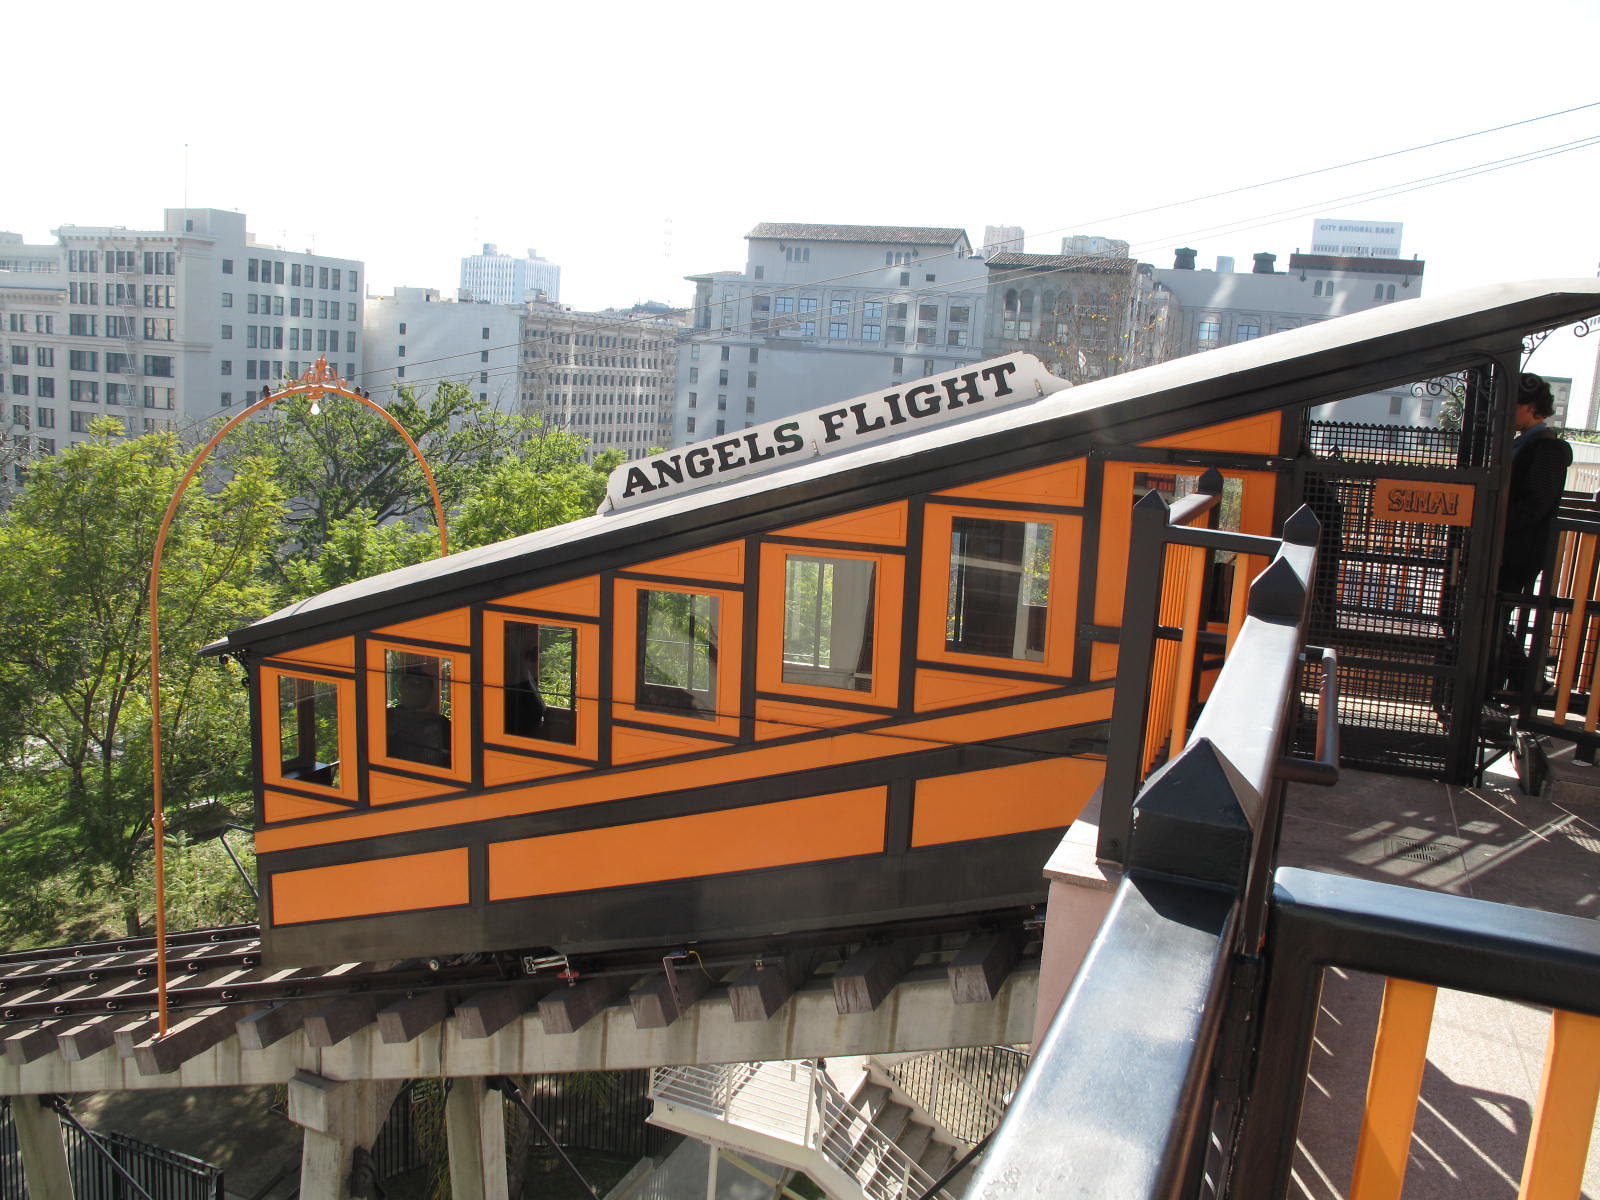 Side view of the funicular with its rooftop sign "angels flight"